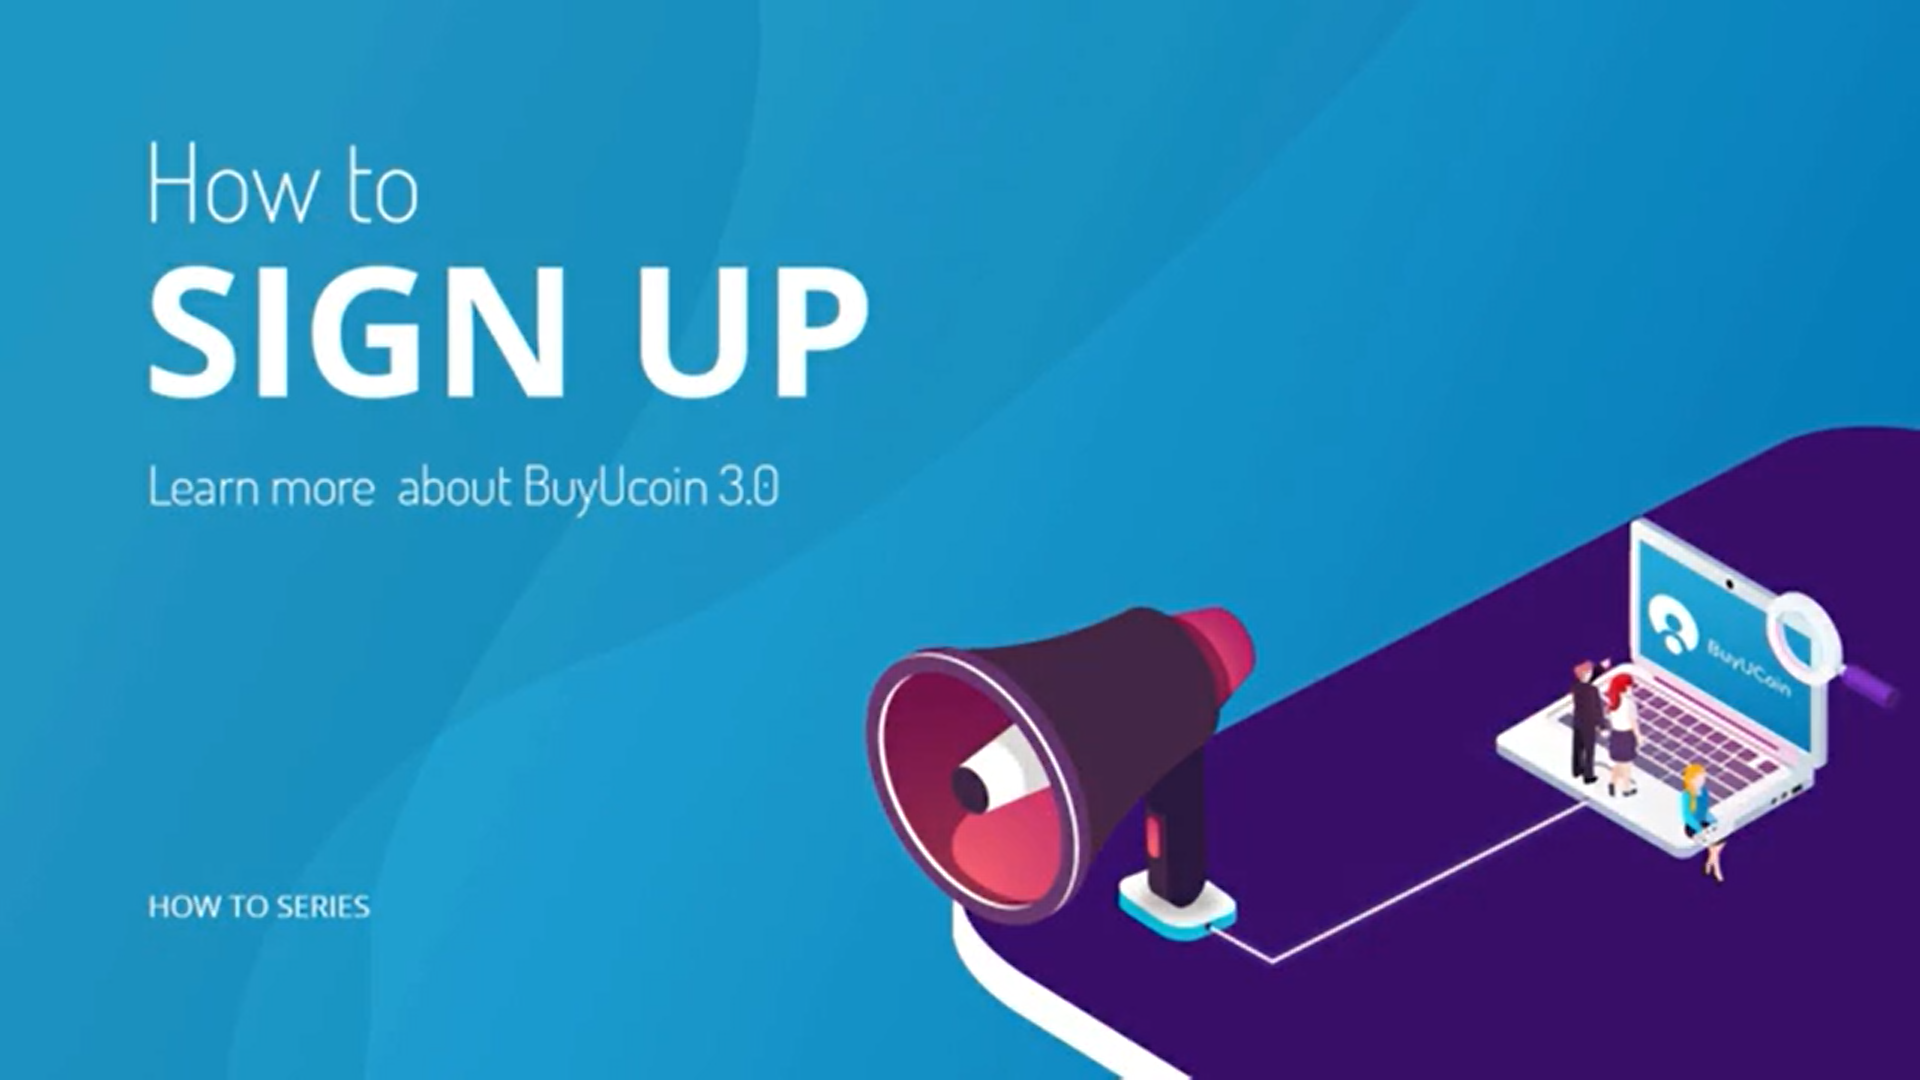 How To SignUp and Register for BuyUcoin